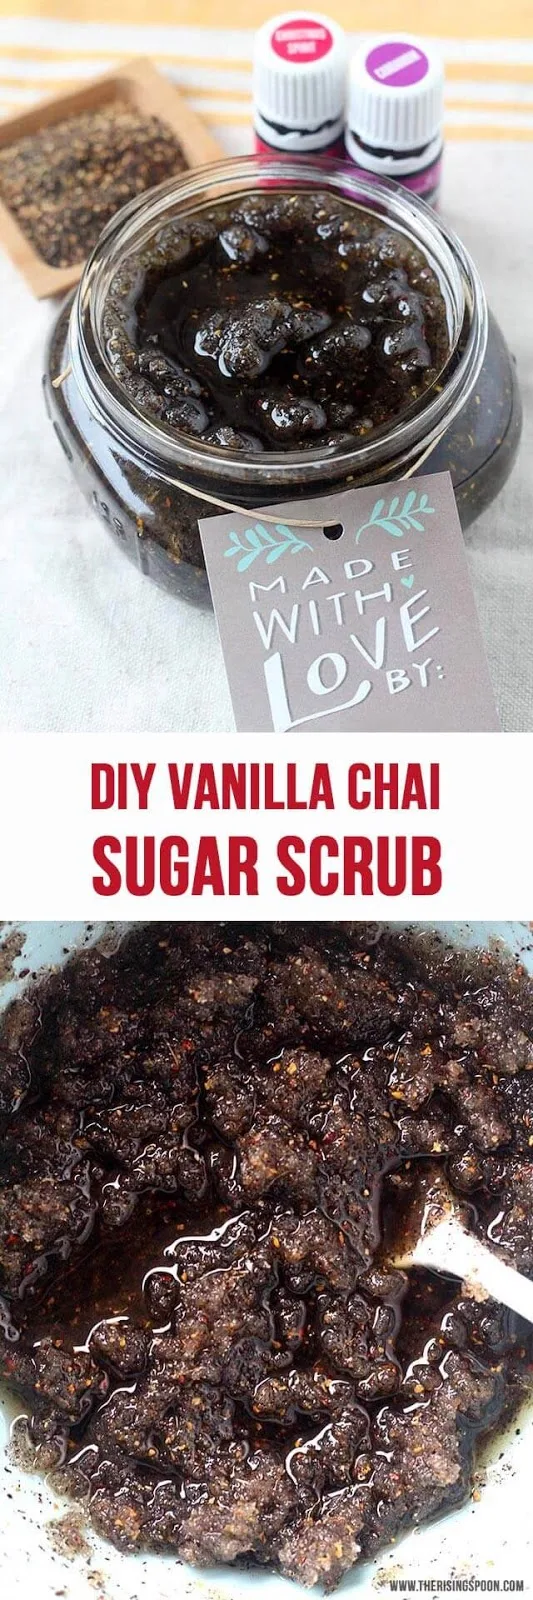 DIY Chai Vanilla Sugar Scrub: an easy homemade body scrub you can make in minutes with inexpensive ingredients. Apply this warm & cozy scrub to your body after a long day and you'll feel pampered in no time!